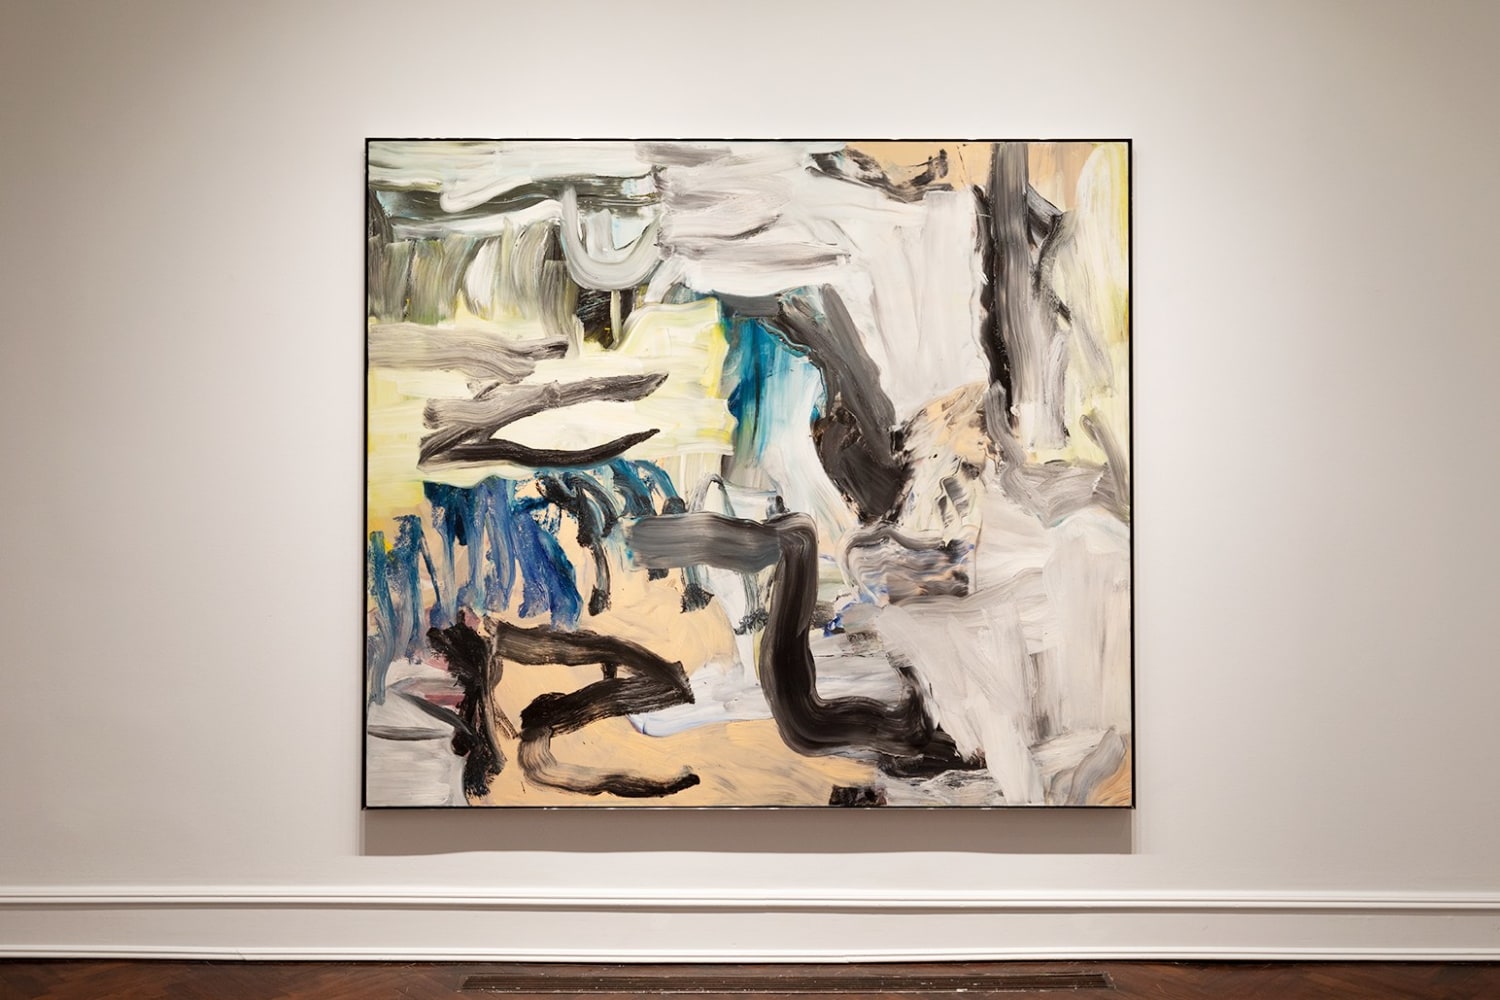 Installation&amp;nbsp;view of&amp;nbsp;De Kooning/Shiraga&amp;nbsp;at Mnuchin Gallery, New York, in collaboration with Fergus McCaffrey, February 15-April 16, 2022. &amp;copy; 2022 The Willem de Kooning Foundation / Artists Rights Society (ARS), New York; Estate of Kazuo Shiraga. Photo by&amp;nbsp;Nico&amp;nbsp;Gilmore.